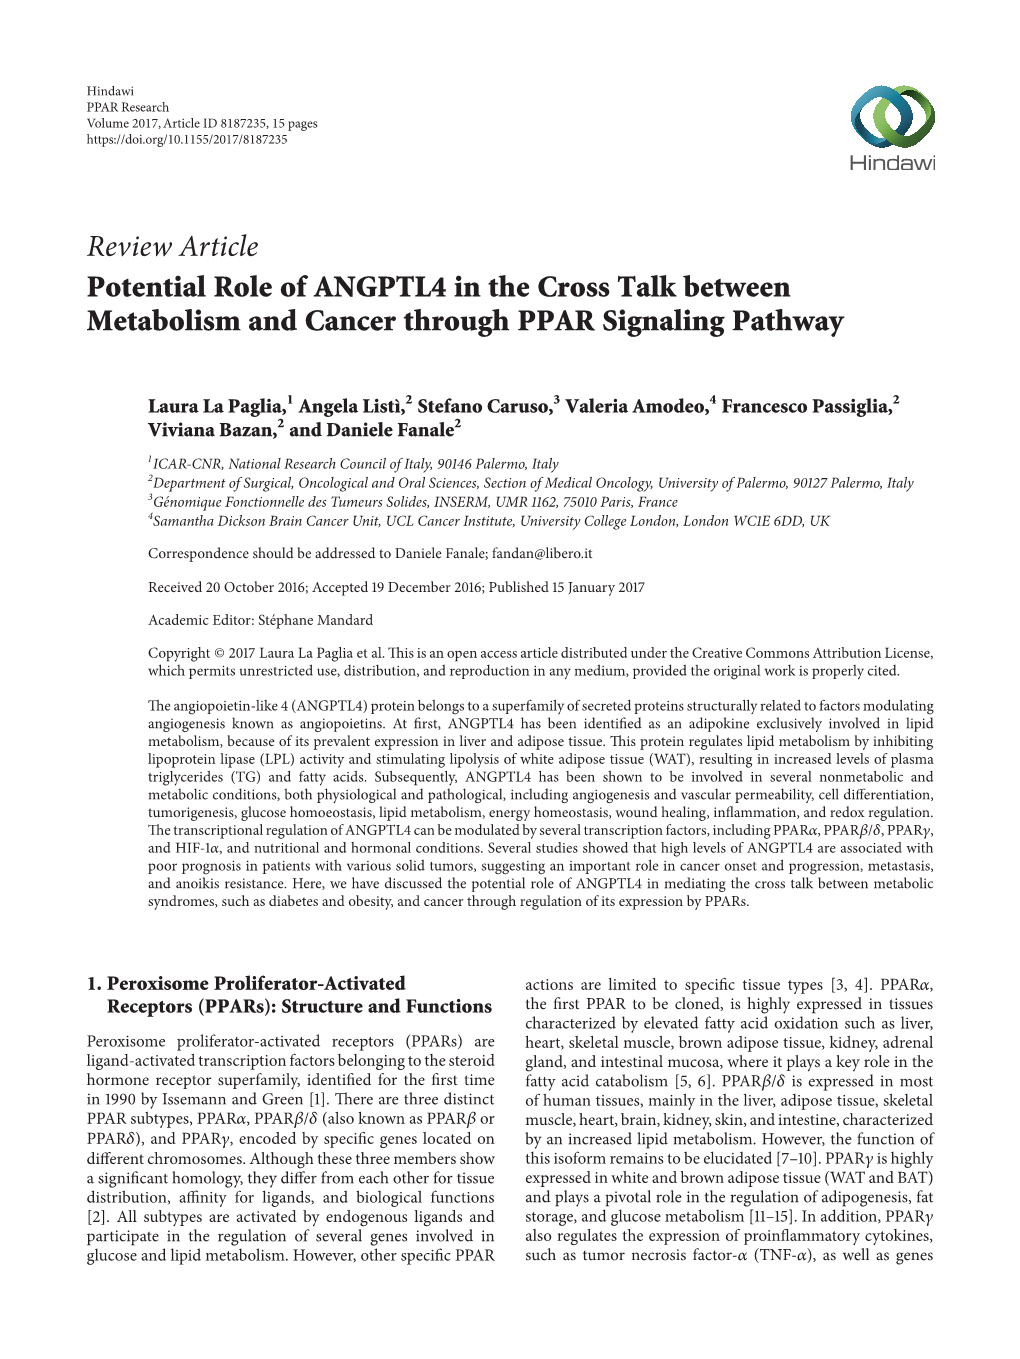 Review Article Potential Role of ANGPTL4 in the Cross Talk Between Metabolism and Cancer Through PPAR Signaling Pathway